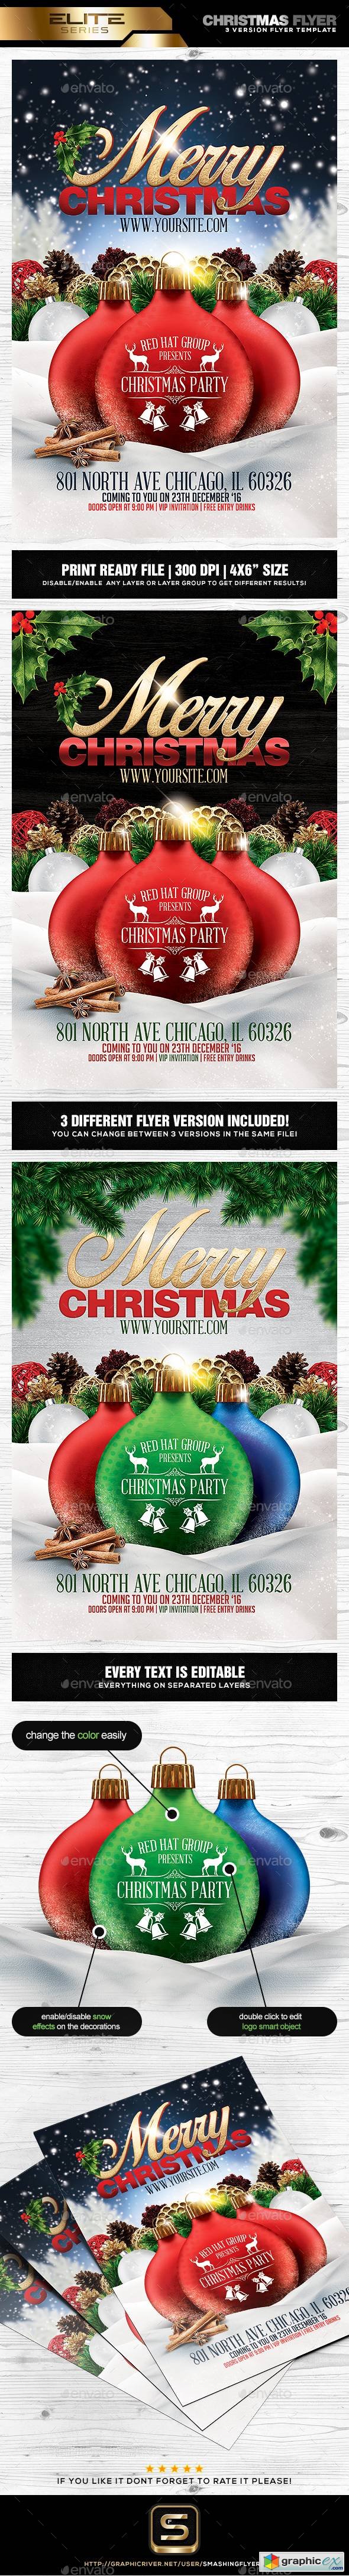 Christmas Party Flyer Template 18898331